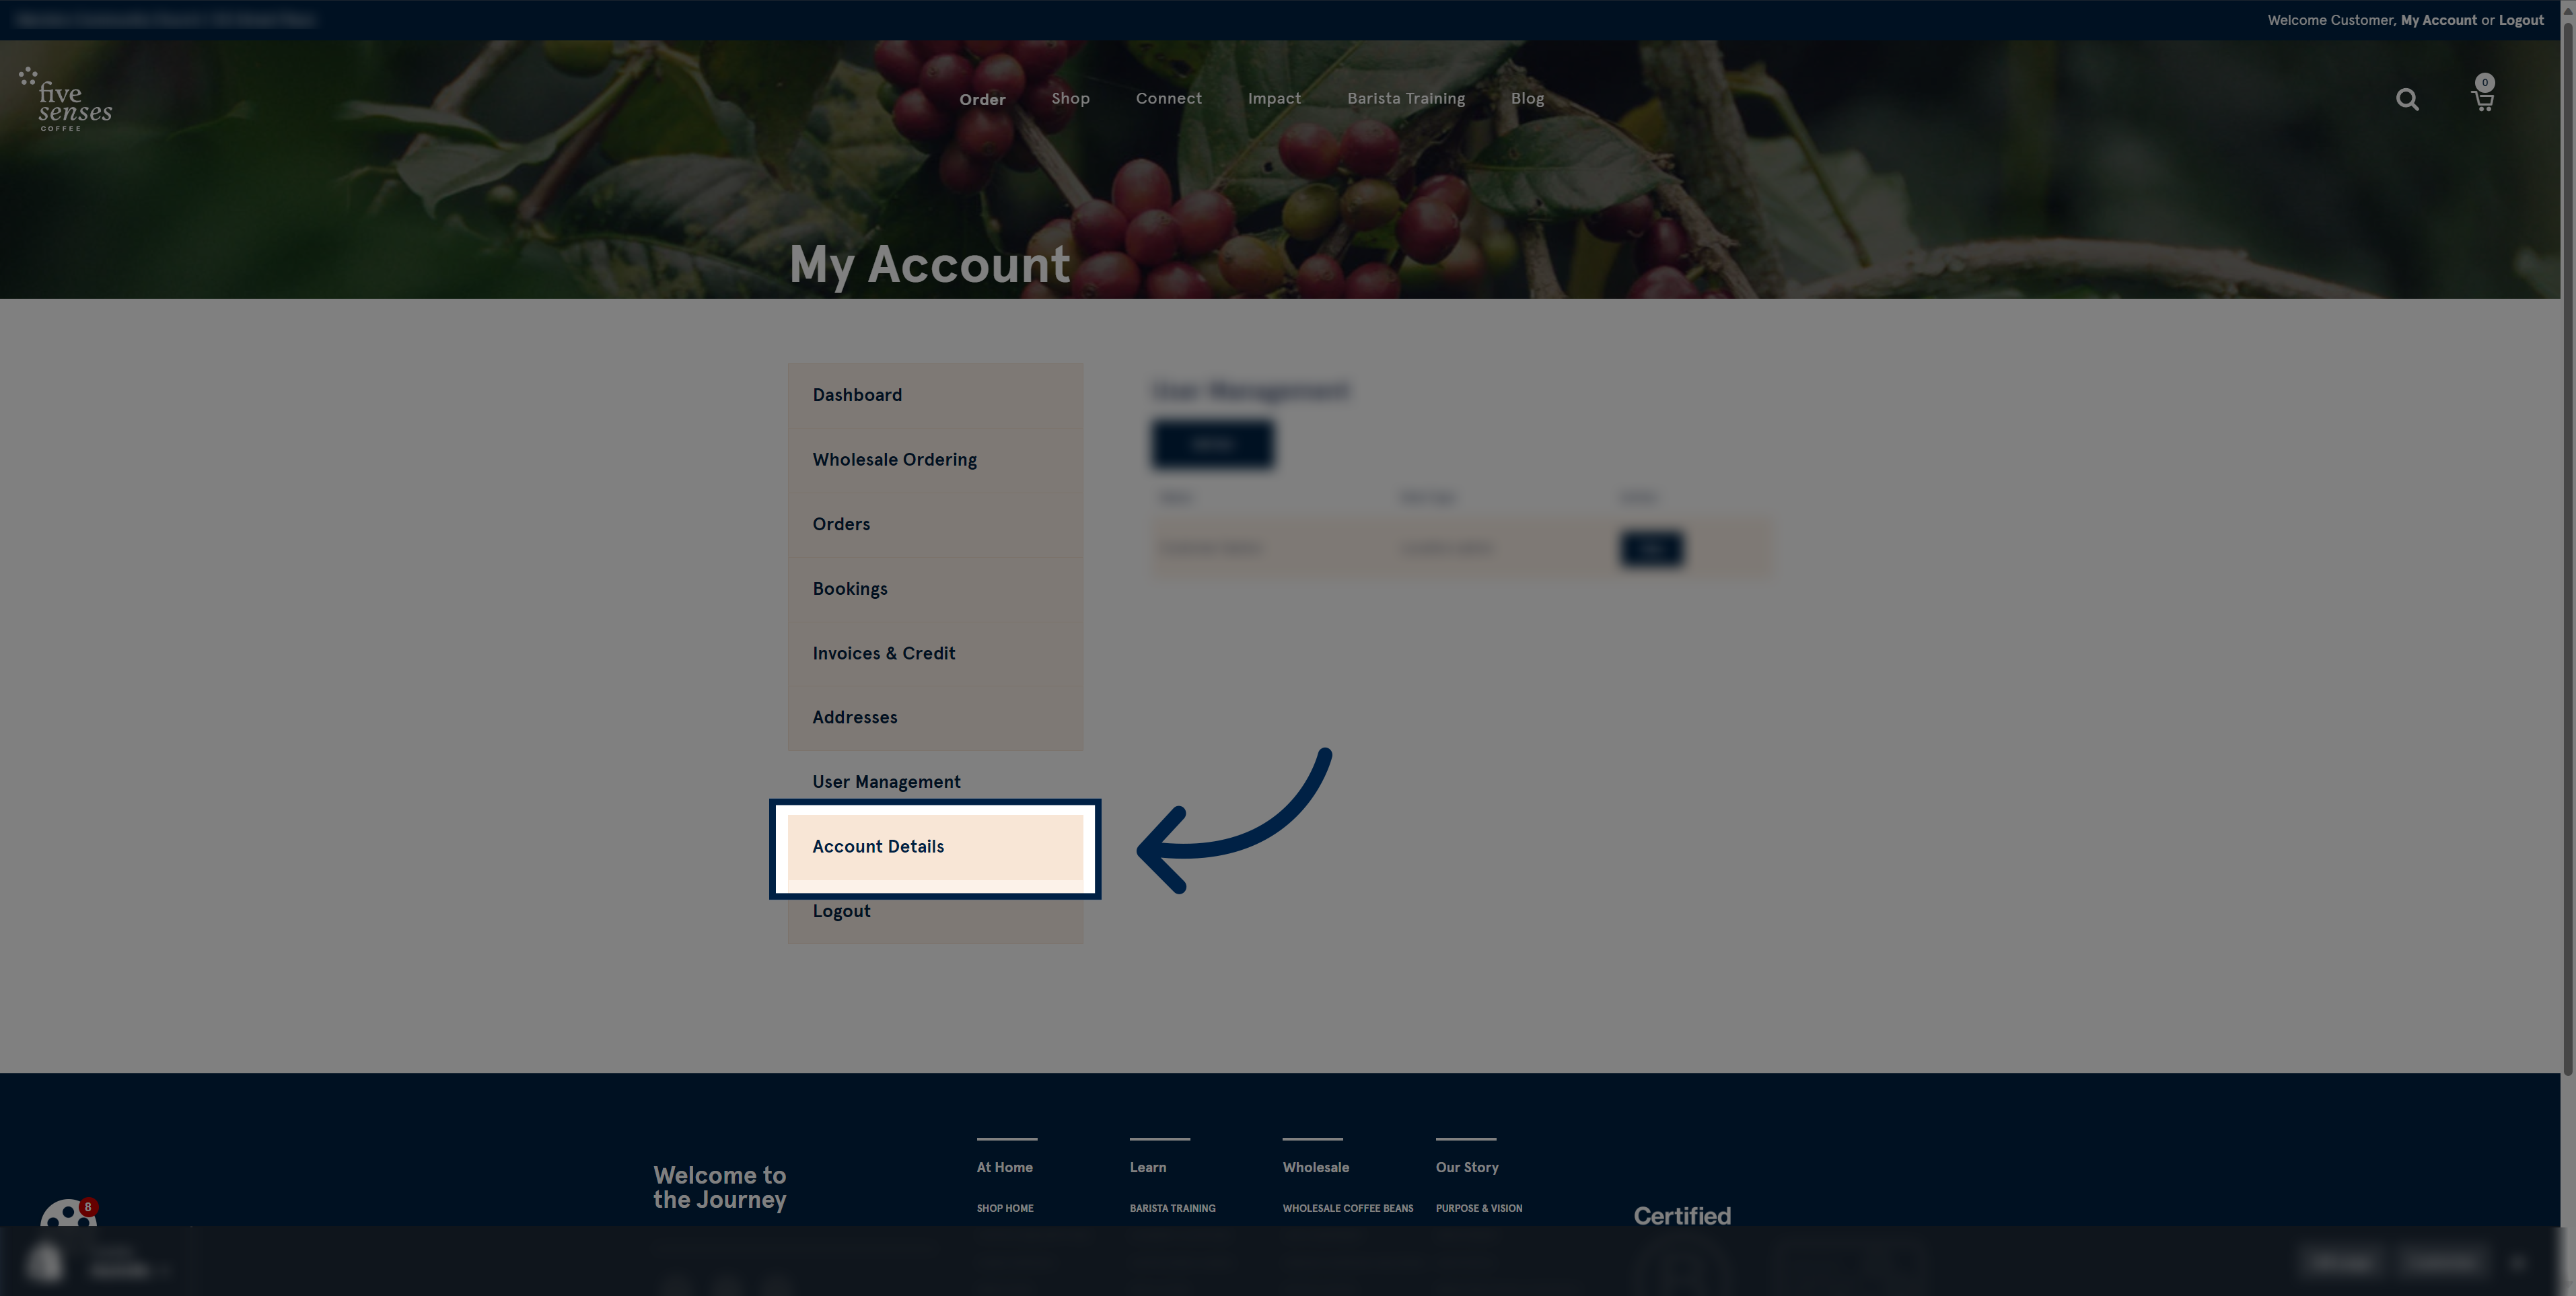 To access your Account details, click 'Account Details'